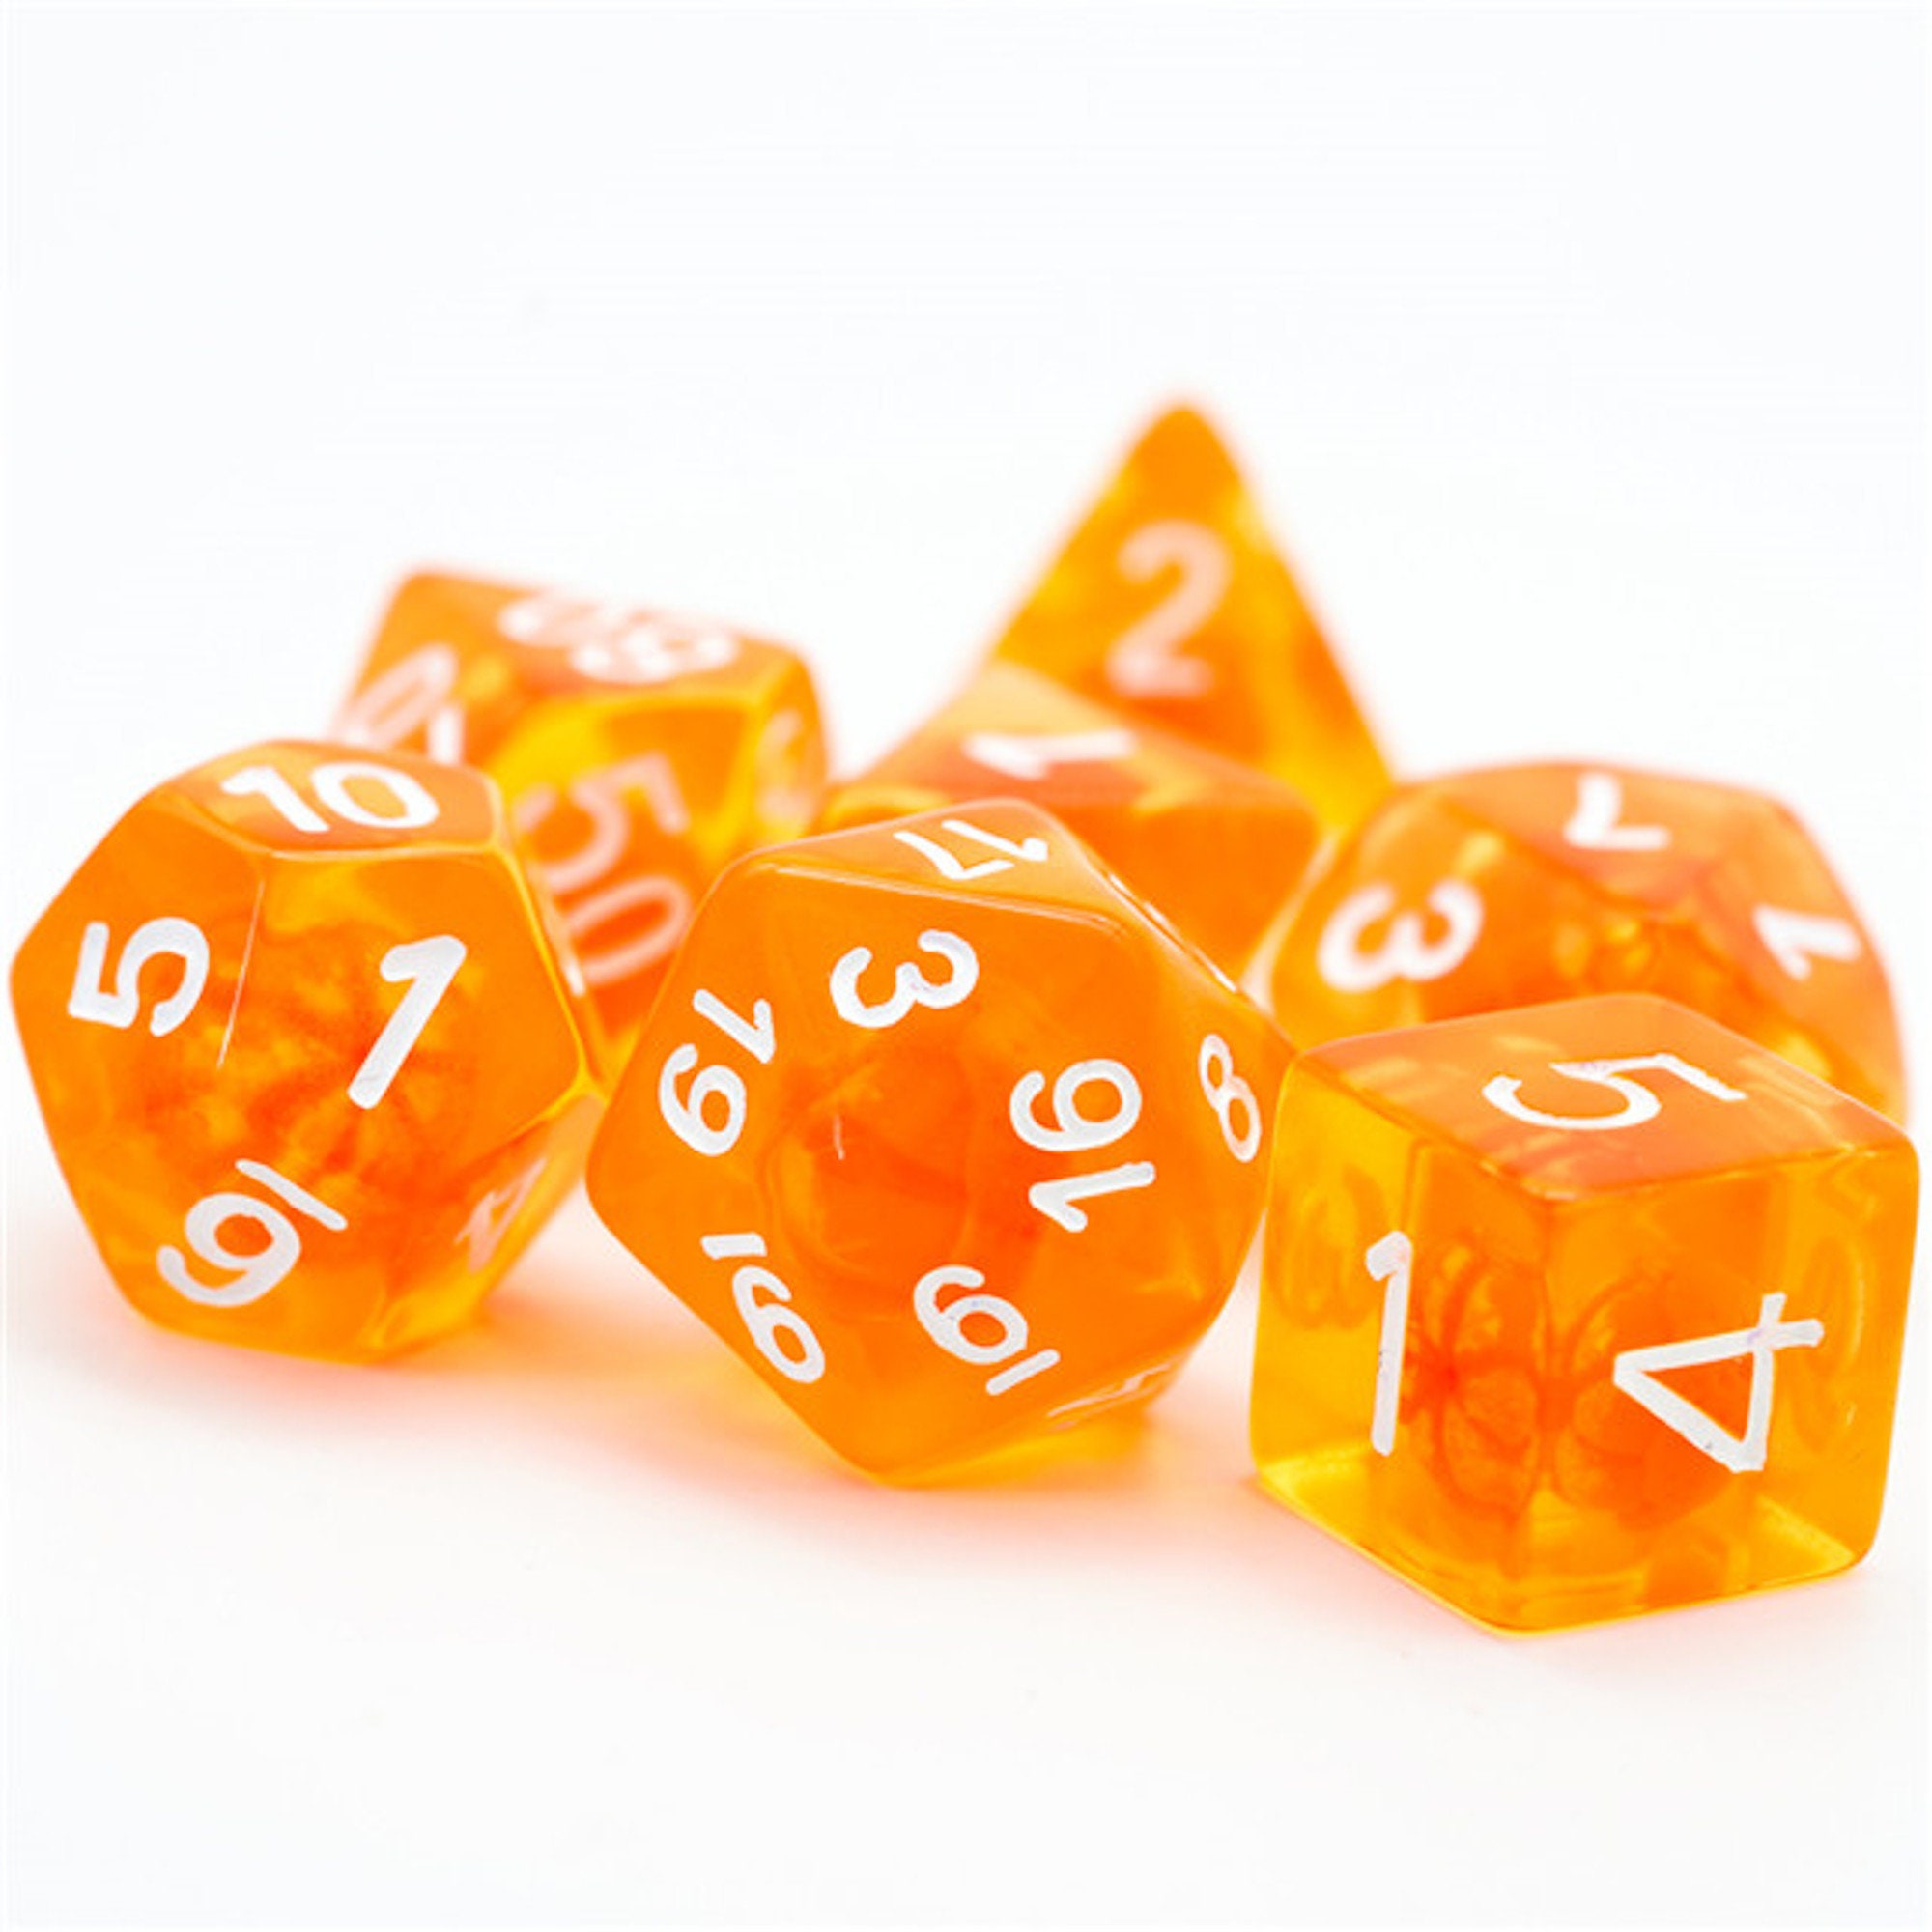 RPG,Role Playing Dice Tangerine set of 7 DnD 